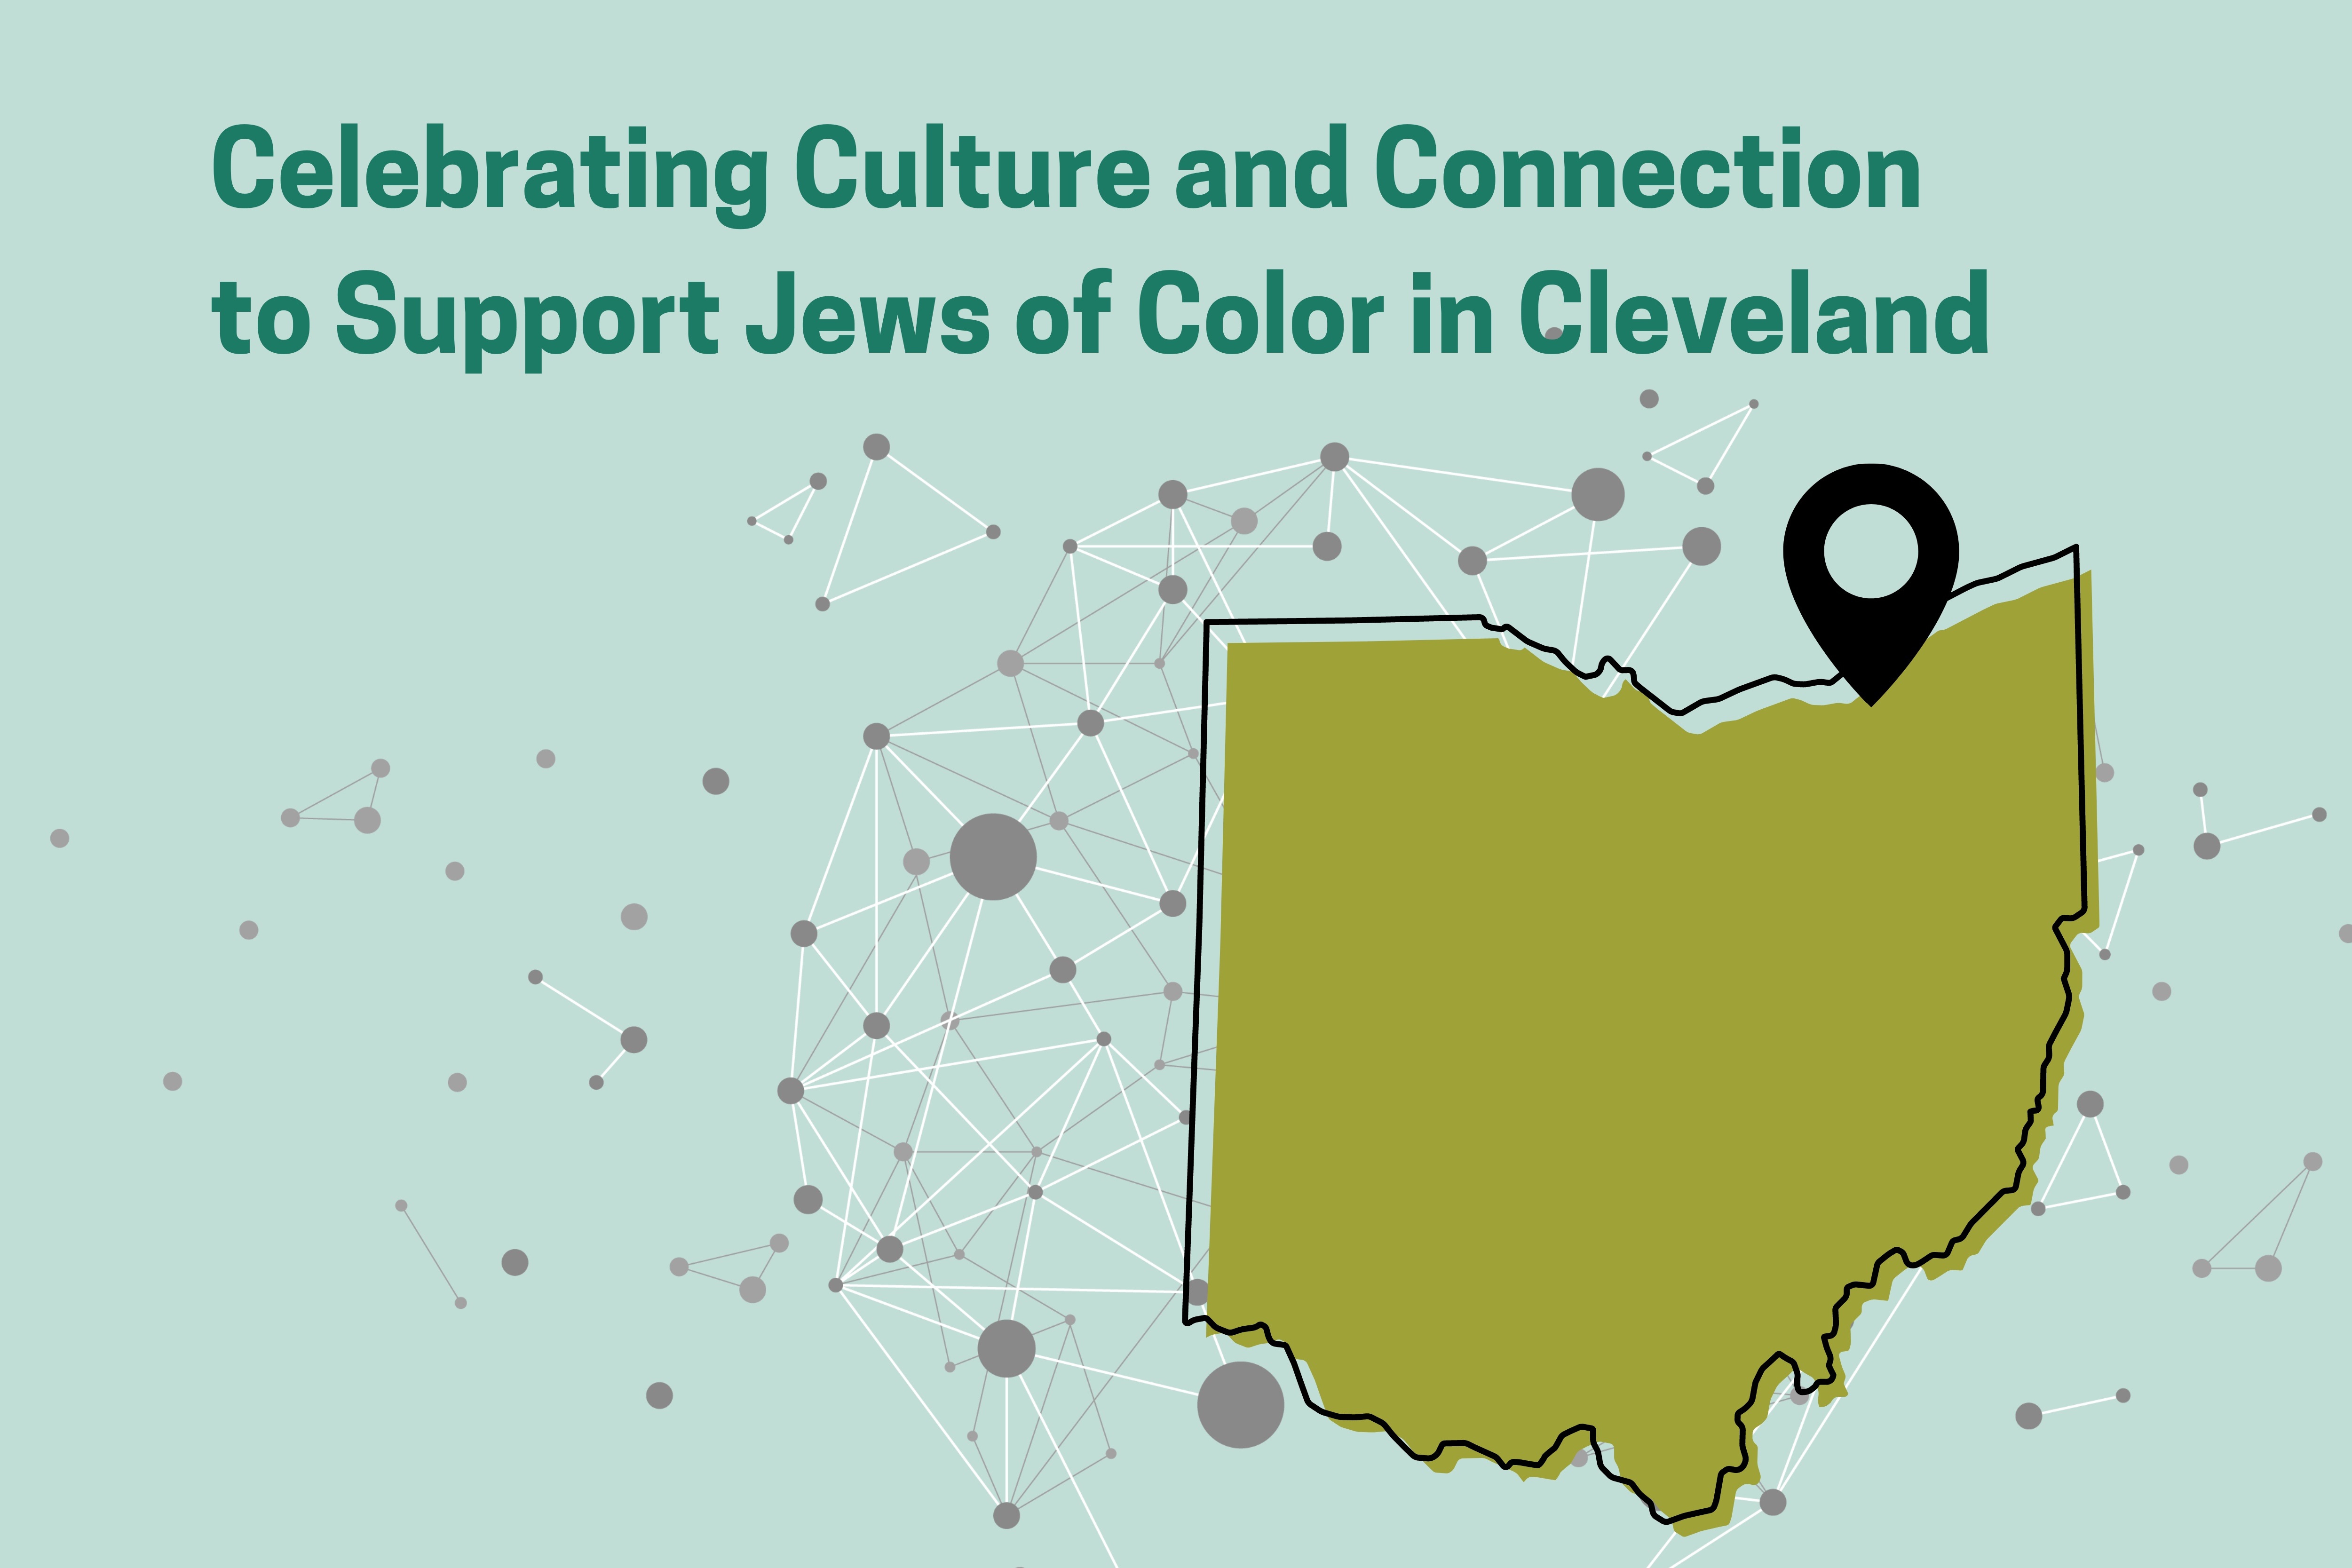 Celebrating Culture and Connection to Support Jews of Color in Cleveland